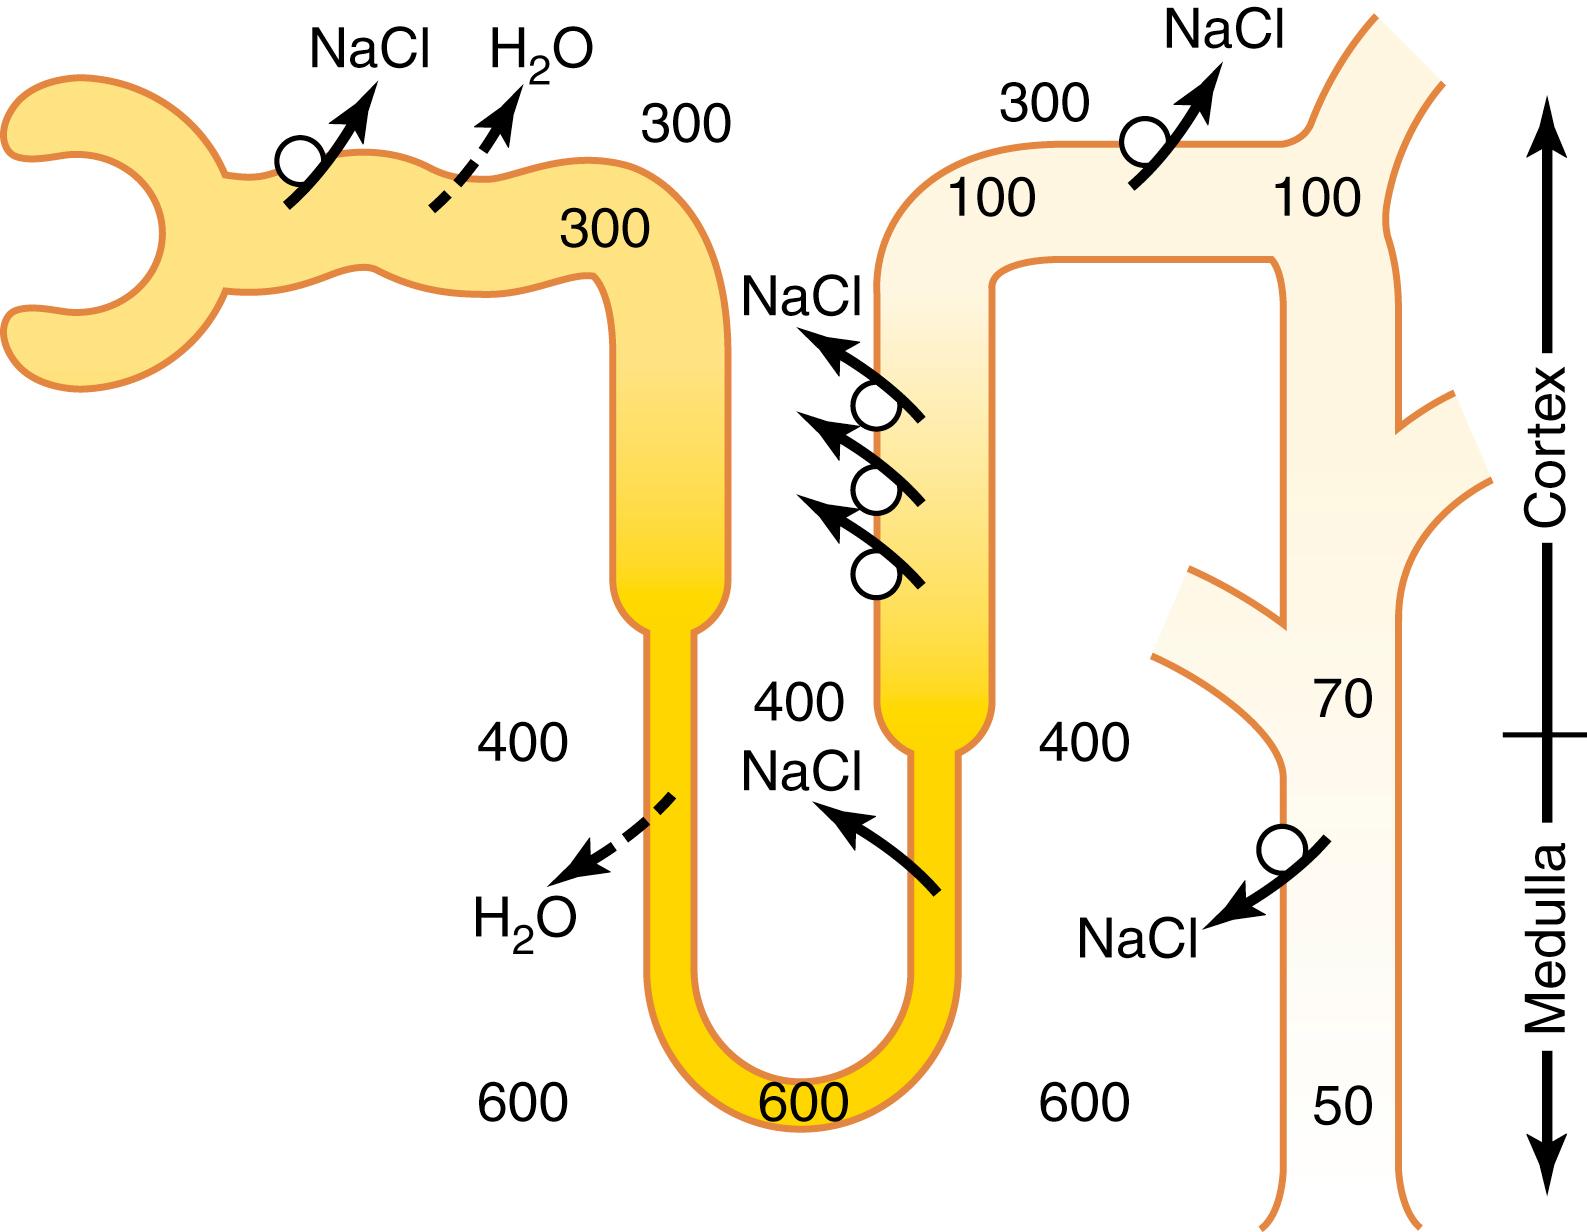 Figure 29-2, Formation of dilute urine when antidiuretic hormone (ADH) levels are very low. Note that in the ascending loop of Henle, the tubular fluid becomes very dilute. In the distal tubules and collecting tubules, the tubular fluid is further diluted by the reabsorption of sodium chloride and the failure to reabsorb water when ADH levels are very low. The failure to reabsorb water and continued reabsorption of solutes lead to a large volume of dilute urine.